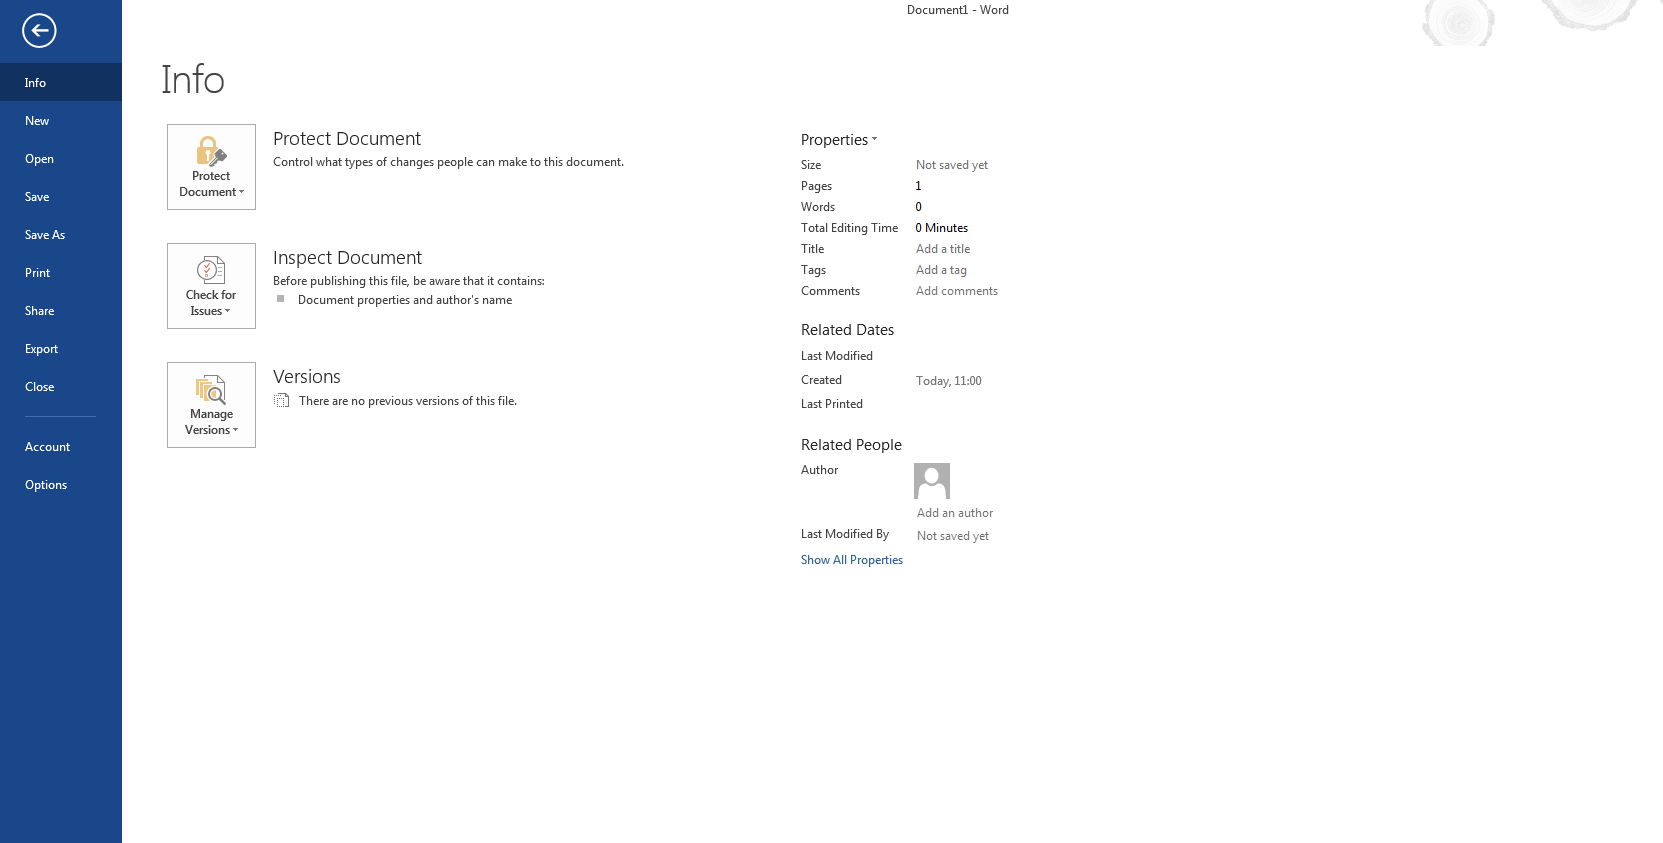 Microsoft Office menu with “Options” at the bottom left